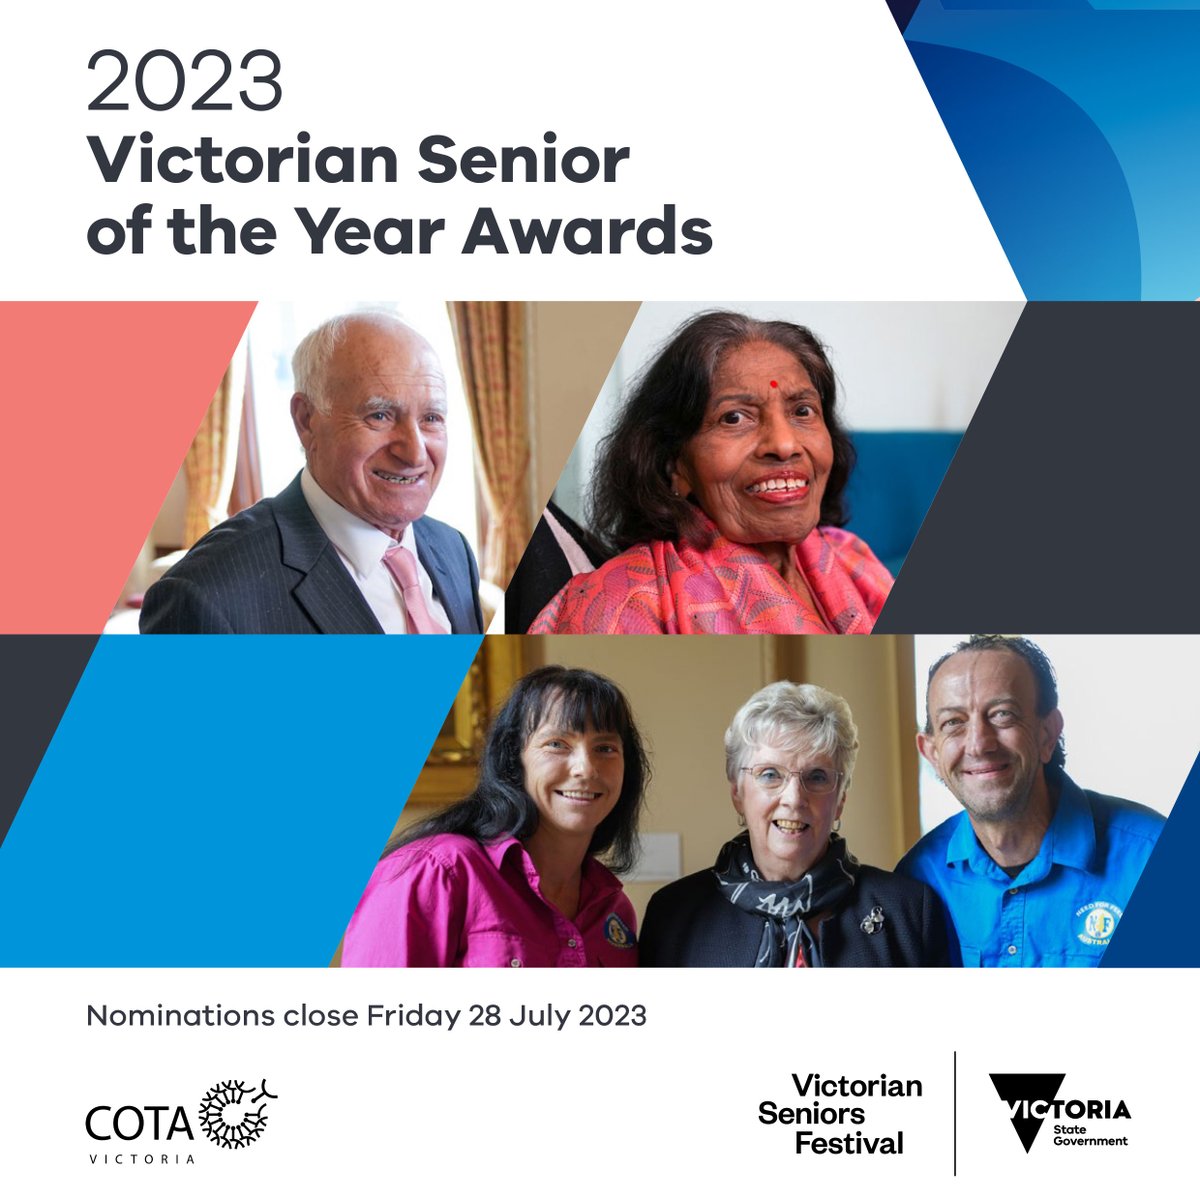 Nominations for the Victorian Senior of the Year Awards are NOW OPEN and close on 28 July! Amongst them, the @COTAVictoria Senior Achiever Awards recognises significant contributions to local communities & Victoria. Learn more & access nomination forms: seniorsonline.vic.gov.au/awards